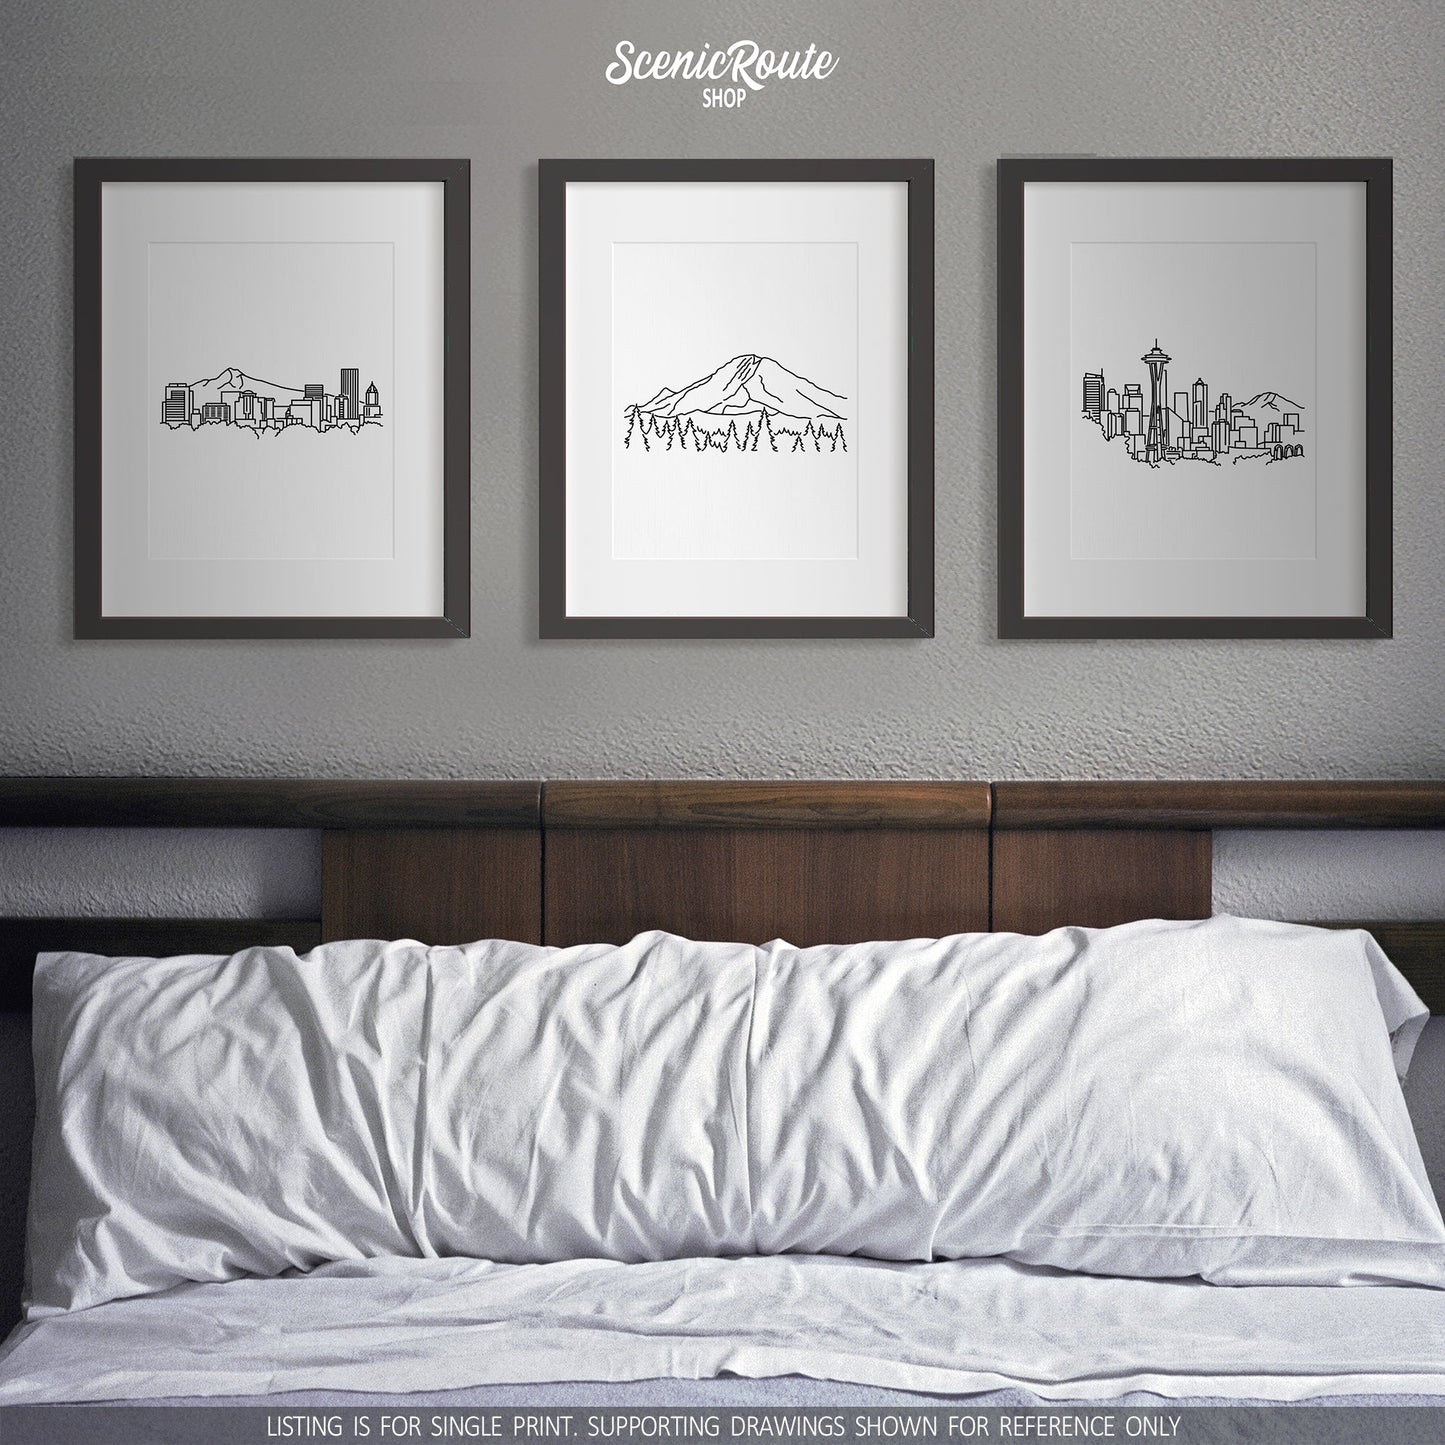 A group of three framed drawings on a white wall above a bed. The line art drawings include the Portland Skyline, Mount Rainier National Park, and Seattle Skyline